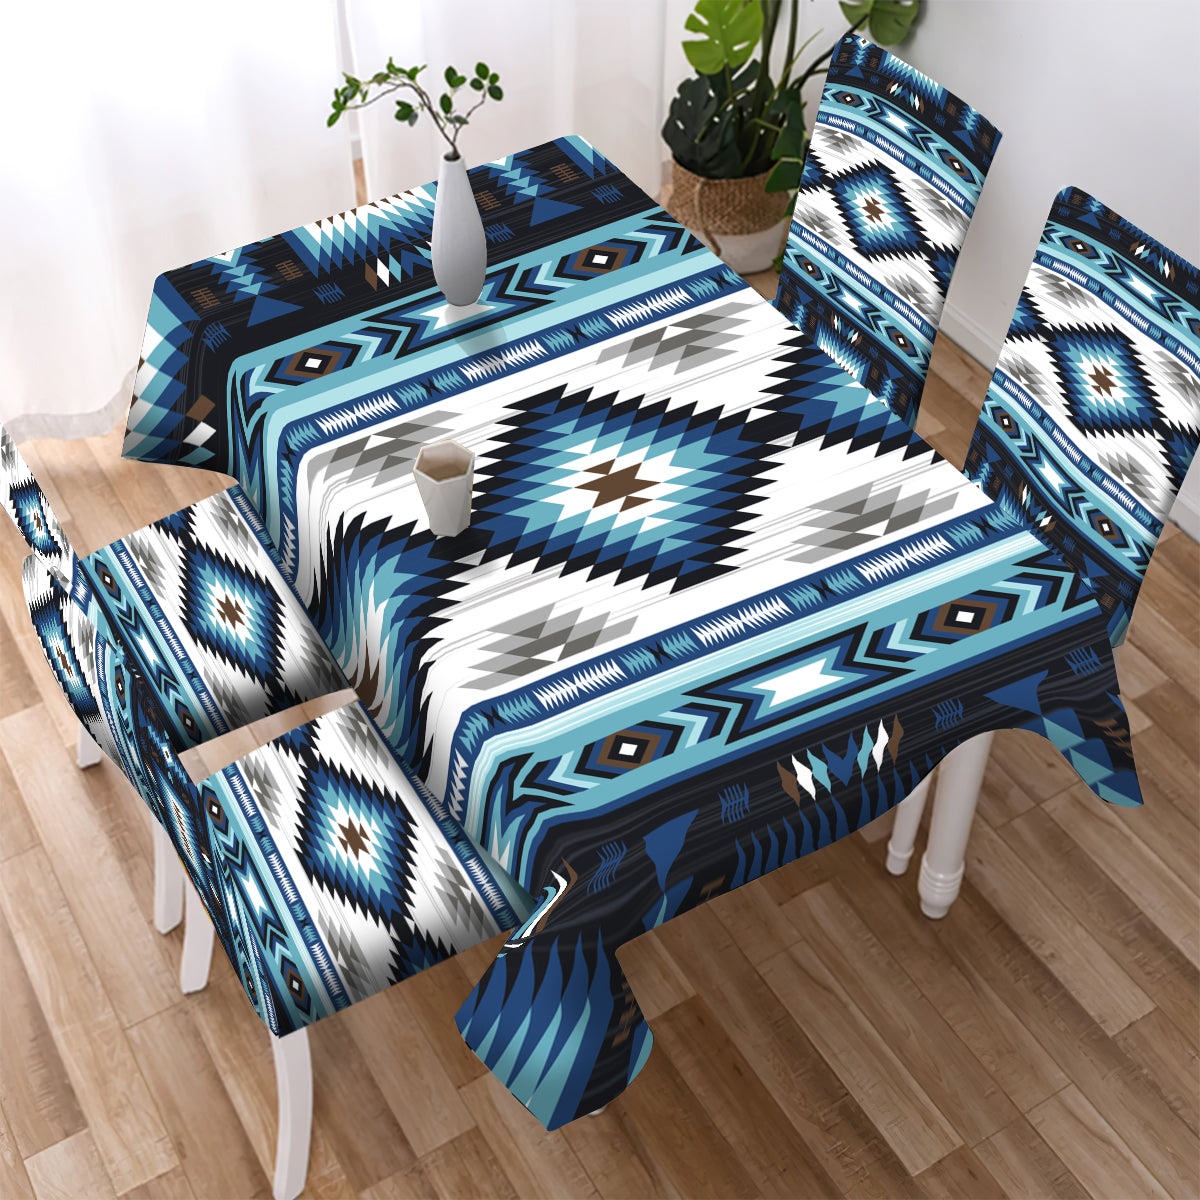 Blue Tribe Design Native American Tablecloth - Chair cover WCS